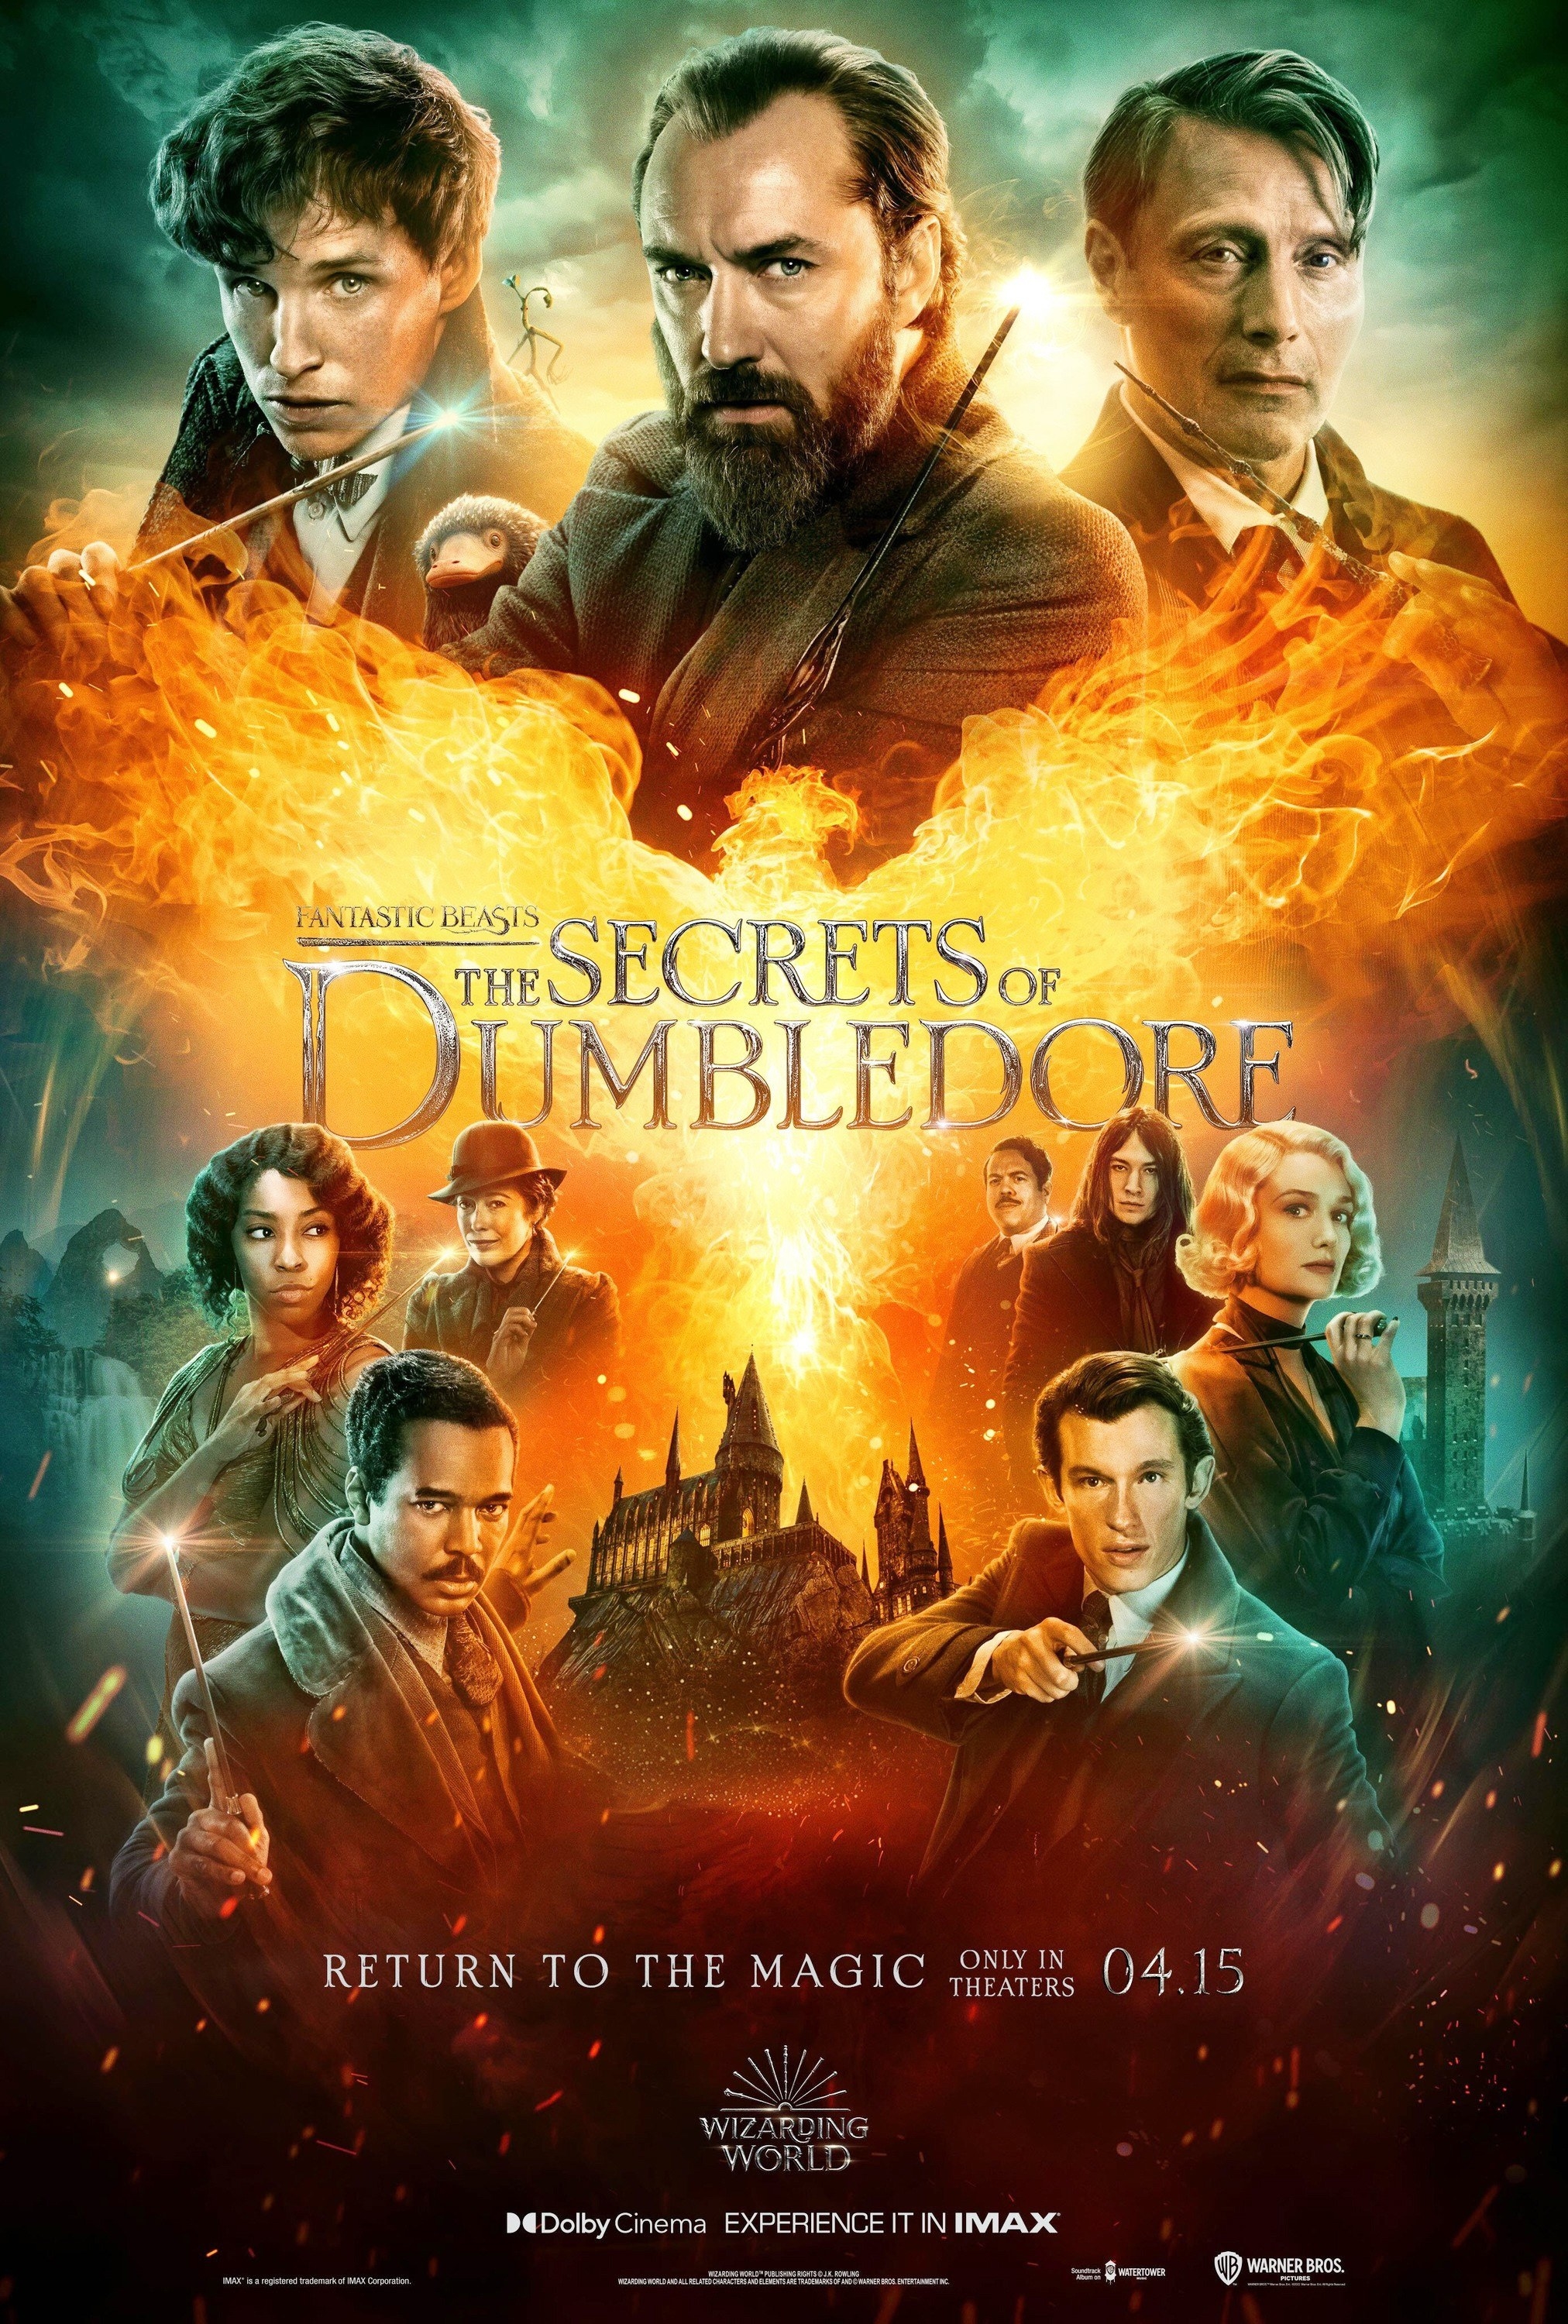 The US poster for Fantastic Beasts: The Secrets of Dumbledore